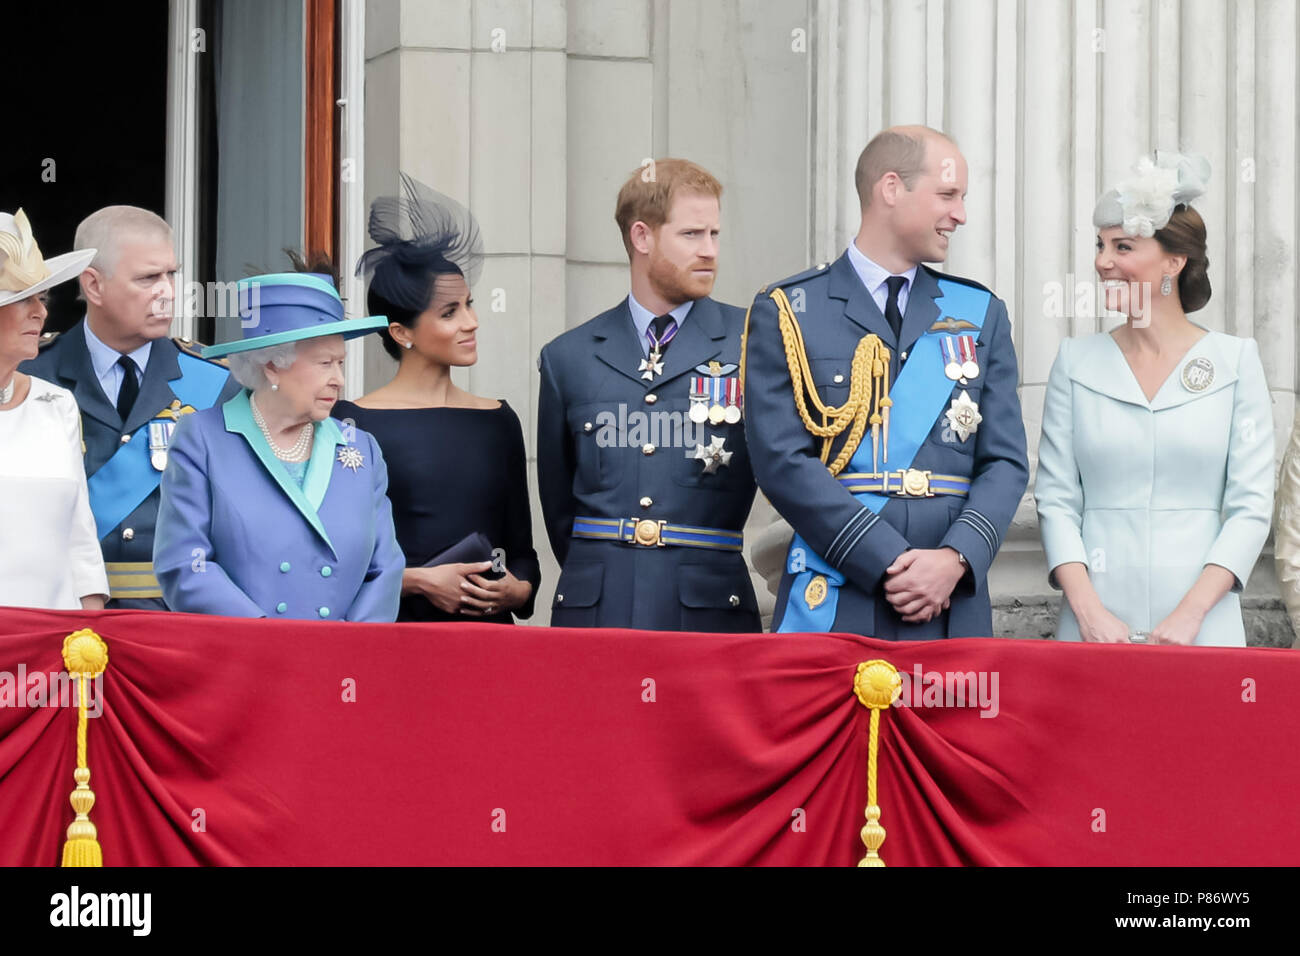 London, UK. 10th July 2018. Her Majesty The Queen, TRH the Duke and Duchess of Sussex and TRH the Duke and Duchess of Cambridge watching the flypast from Buckingham Palace Balcony to commemorate 100 years of the RAF. Credit: amanda rose/Alamy Live News Stock Photo